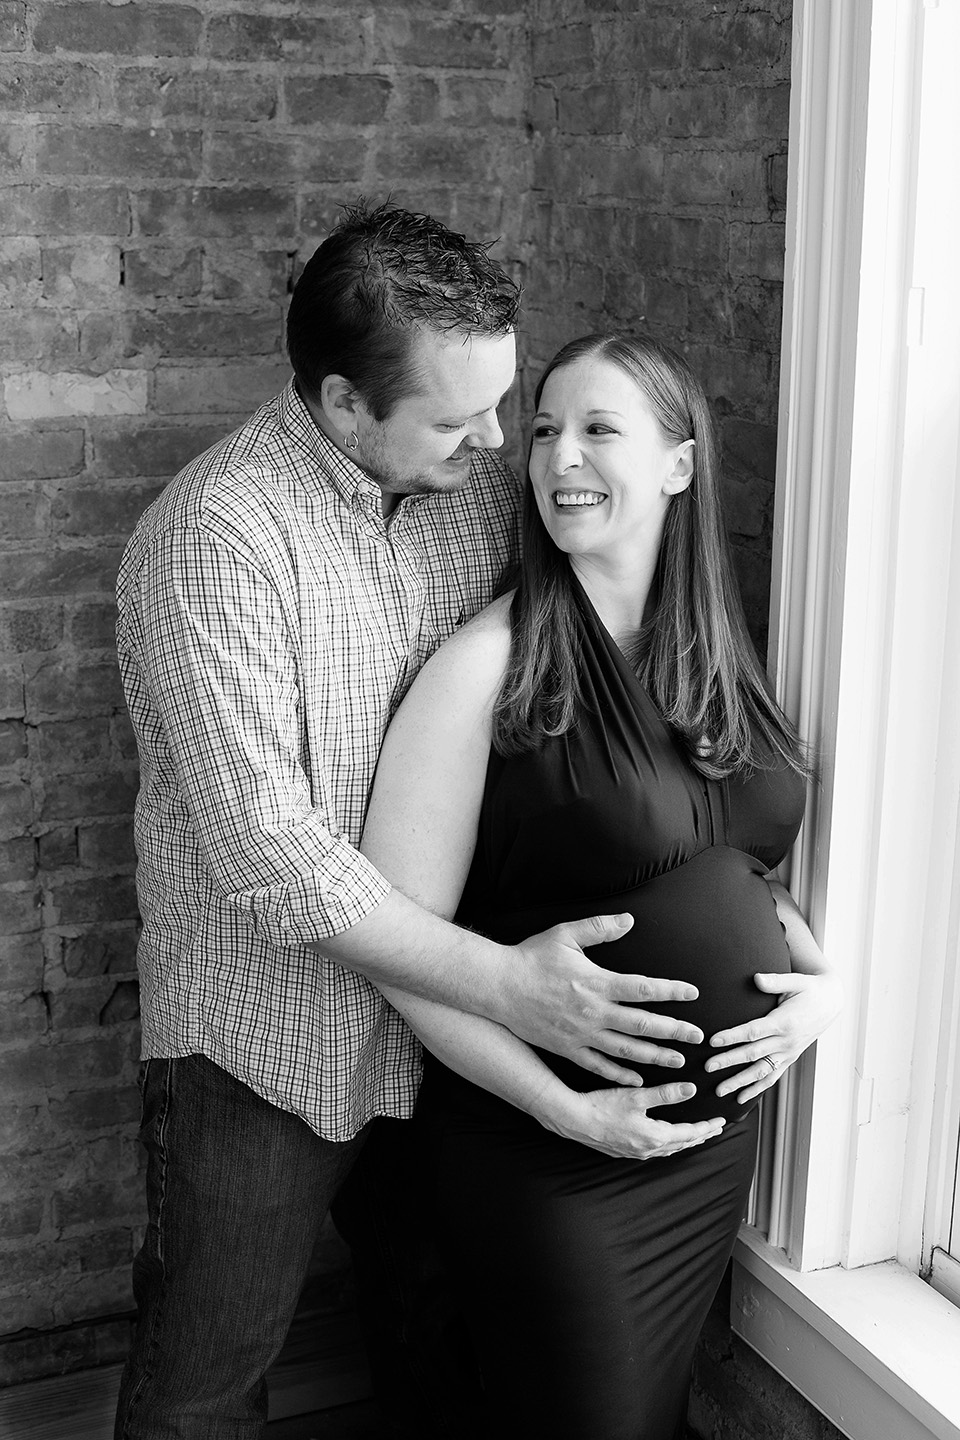 Maternity portraits in Cincinnati OH, Mischief and Laughs Photography